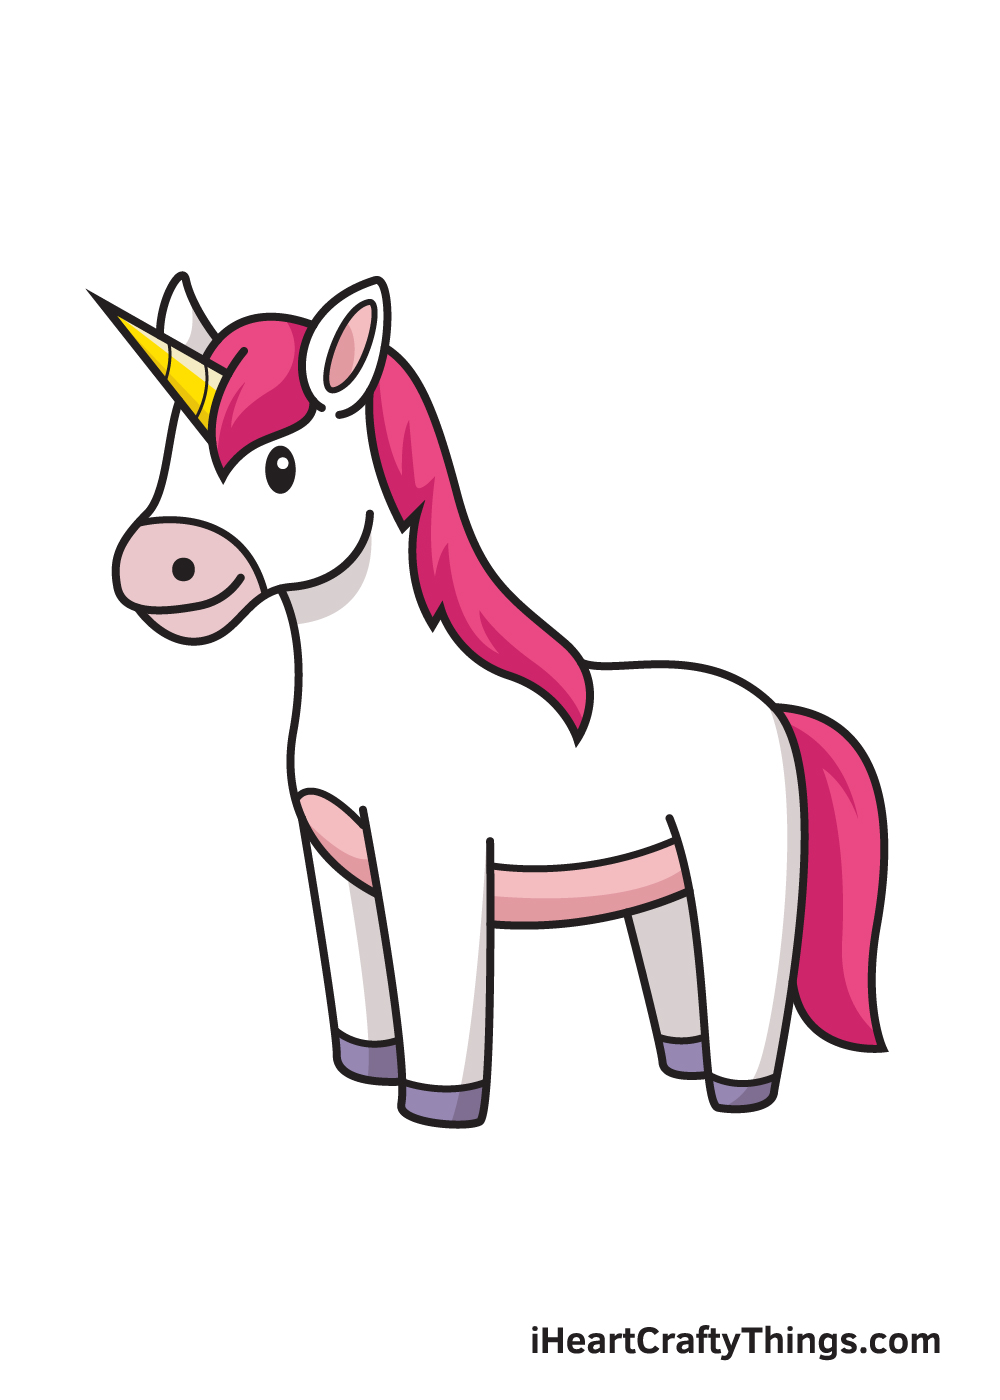 Unicorn Drawing - How To Draw A Unicorn Step By Step